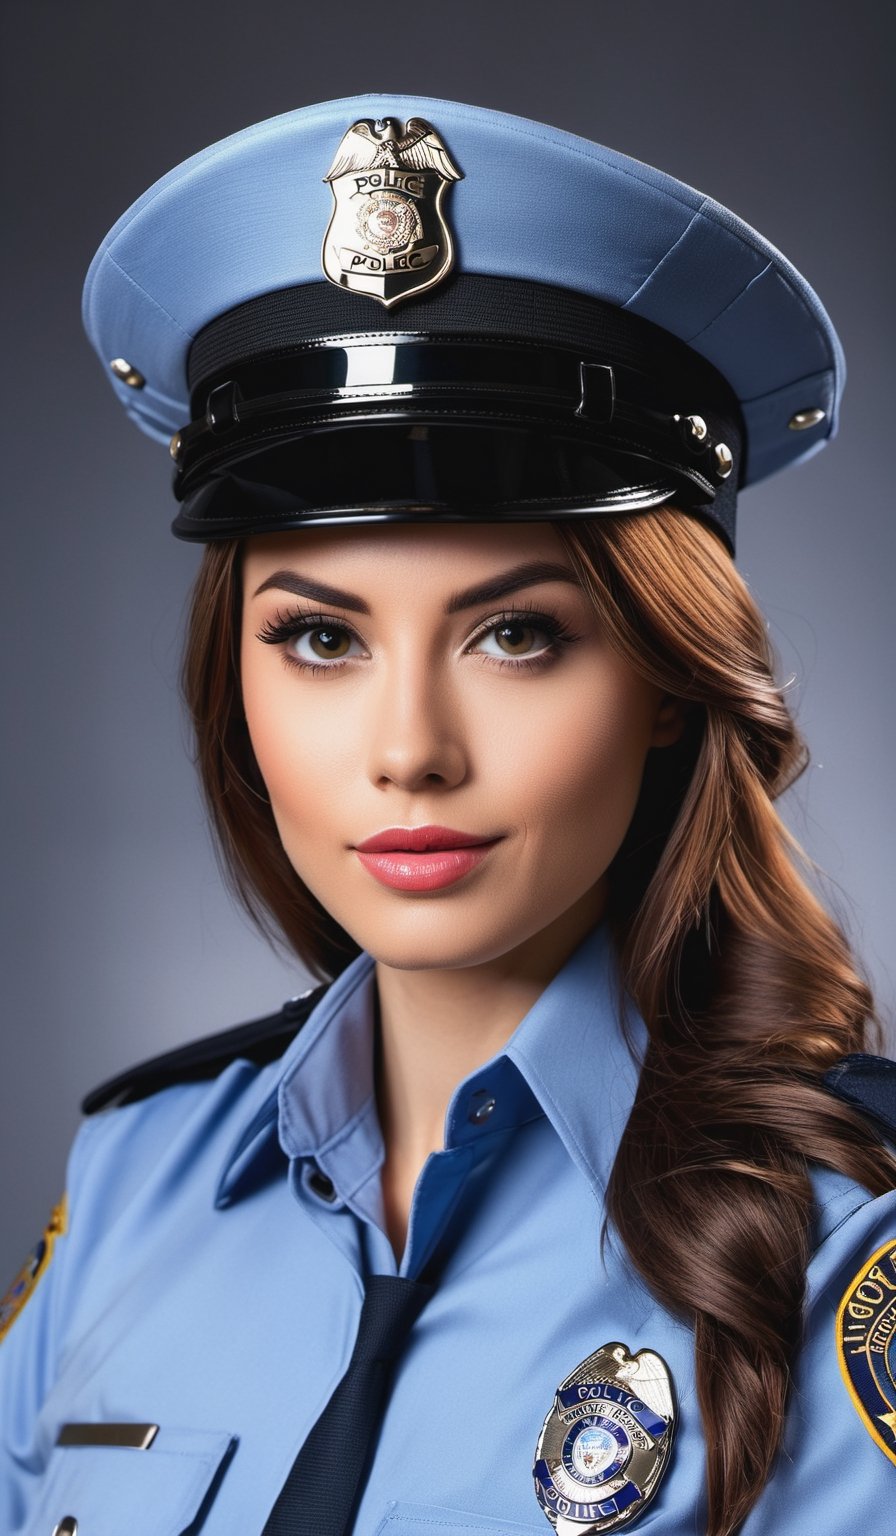 A beautiful woman, wearing a police uniform, the beautiful woman should be a realistic model, dressed in an authentic police uniform, the photograph should have a clear composition and focus on the woman, the resolution of the image should be high enough to show all the details clearly. (((professional image))), (((high image quality))), (((wide view))).